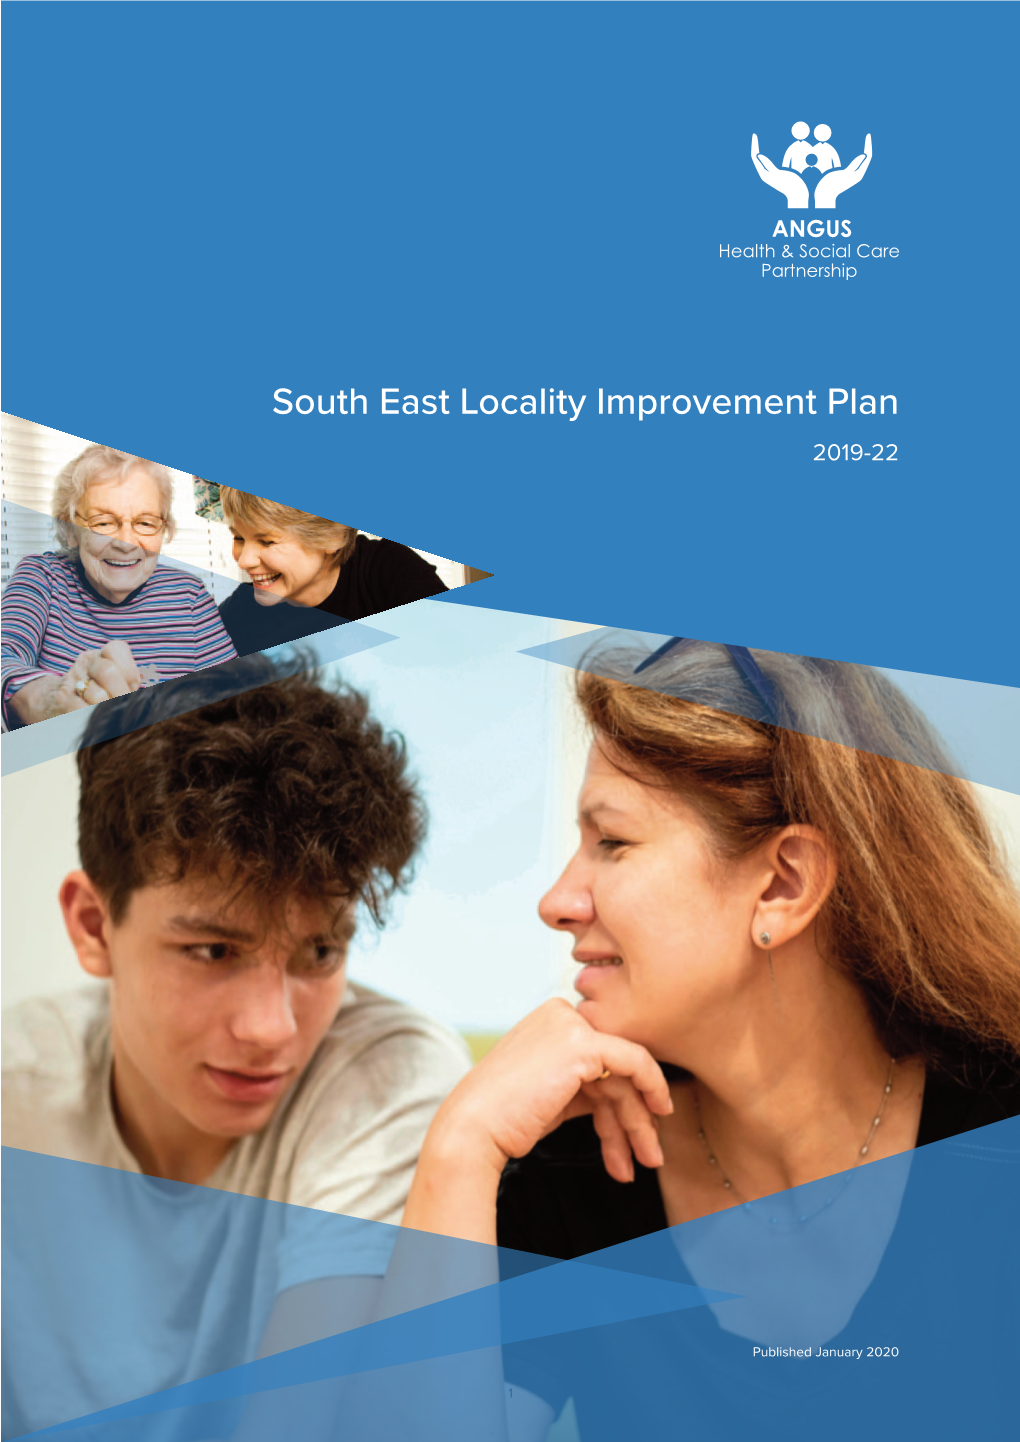 South East Locality Improvement Plan 2019-22